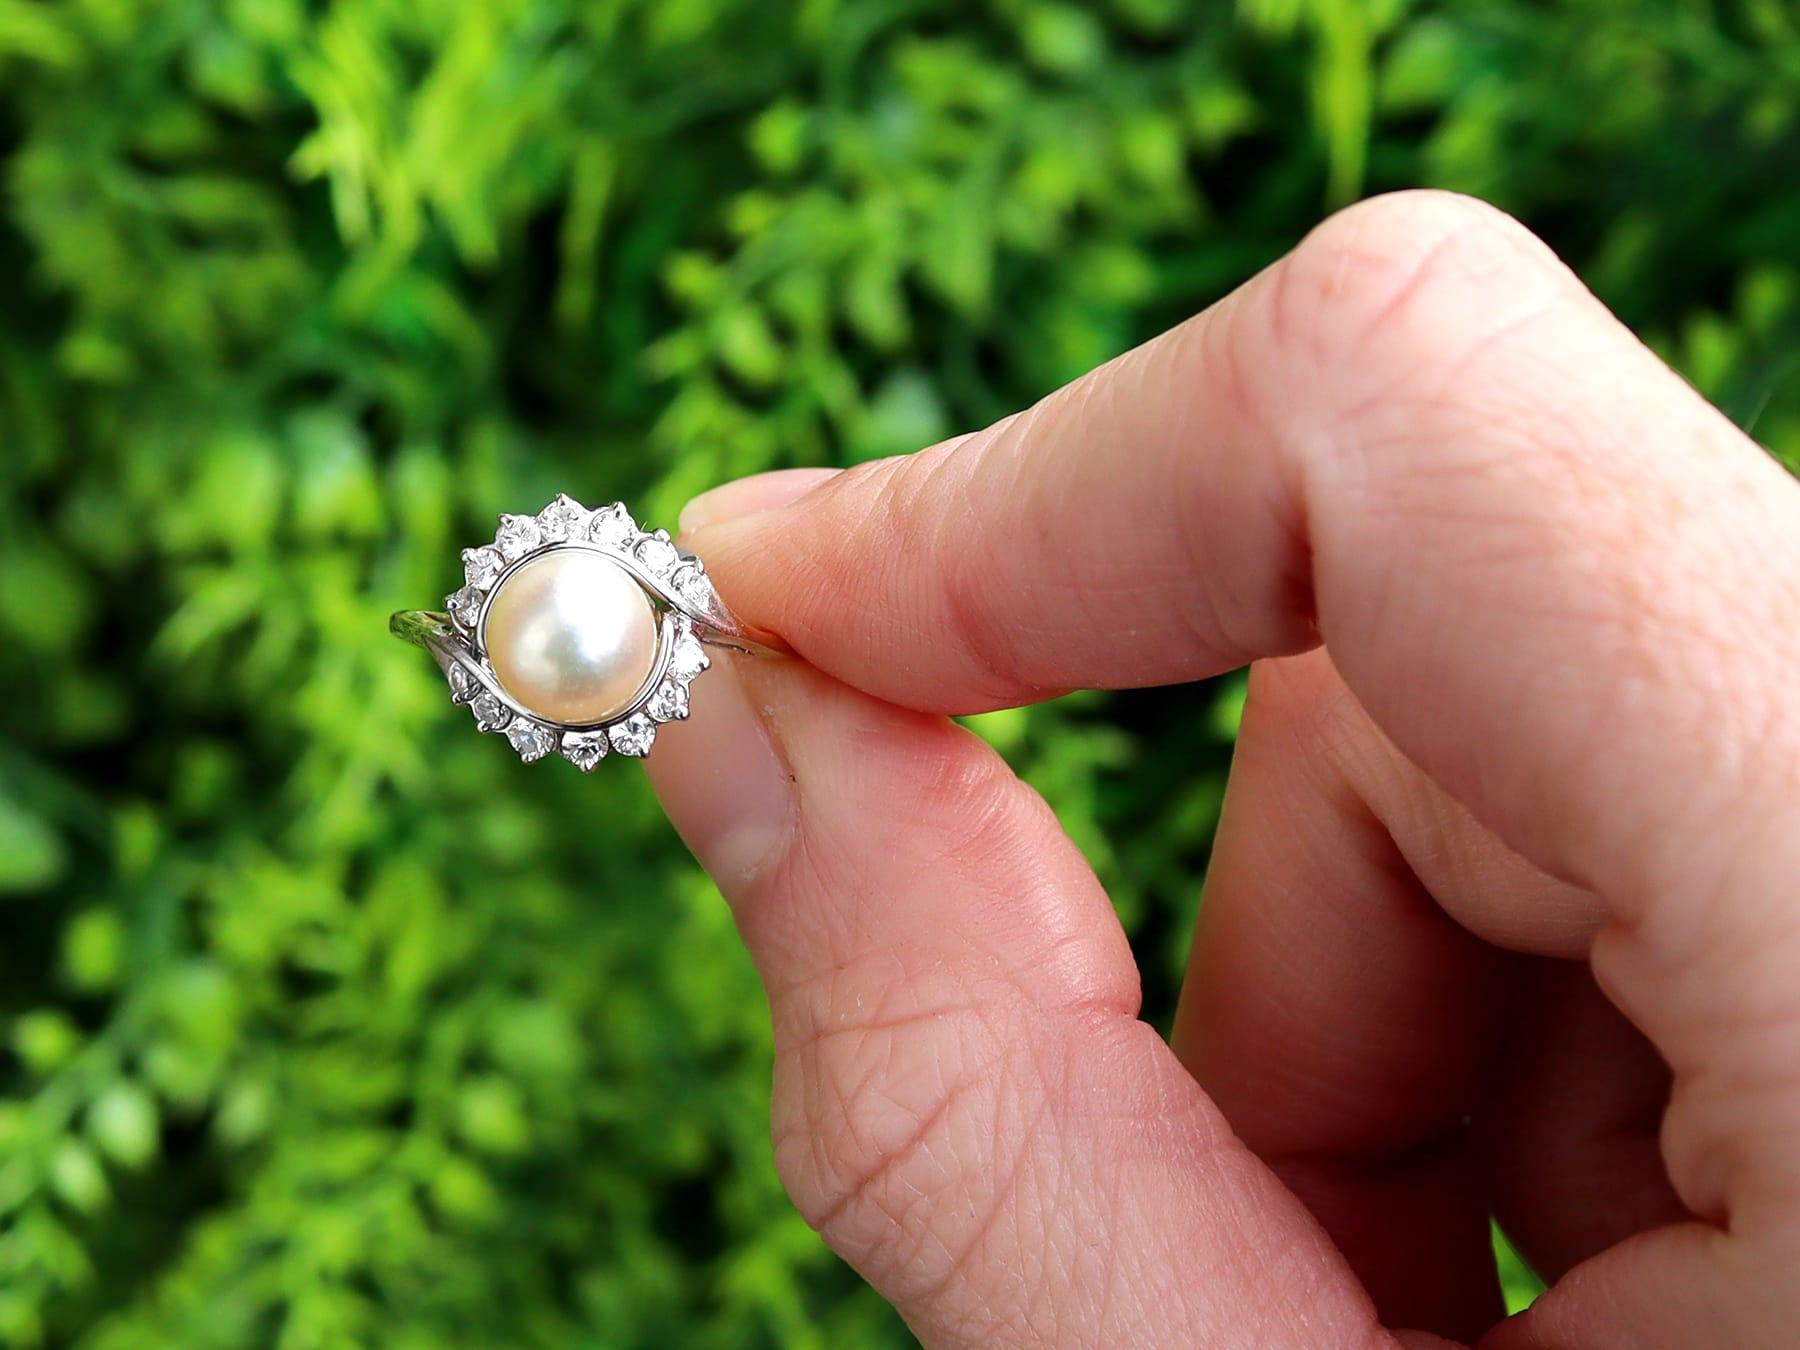 A fine and impressive cultured pearl and 0.33 carat diamond, 18 karat yellow gold and 18 karat white gold set cocktail / dress ring; part of our diverse jewelry and estate jewelry collections.

This fine and impressive pearl and diamond ring has